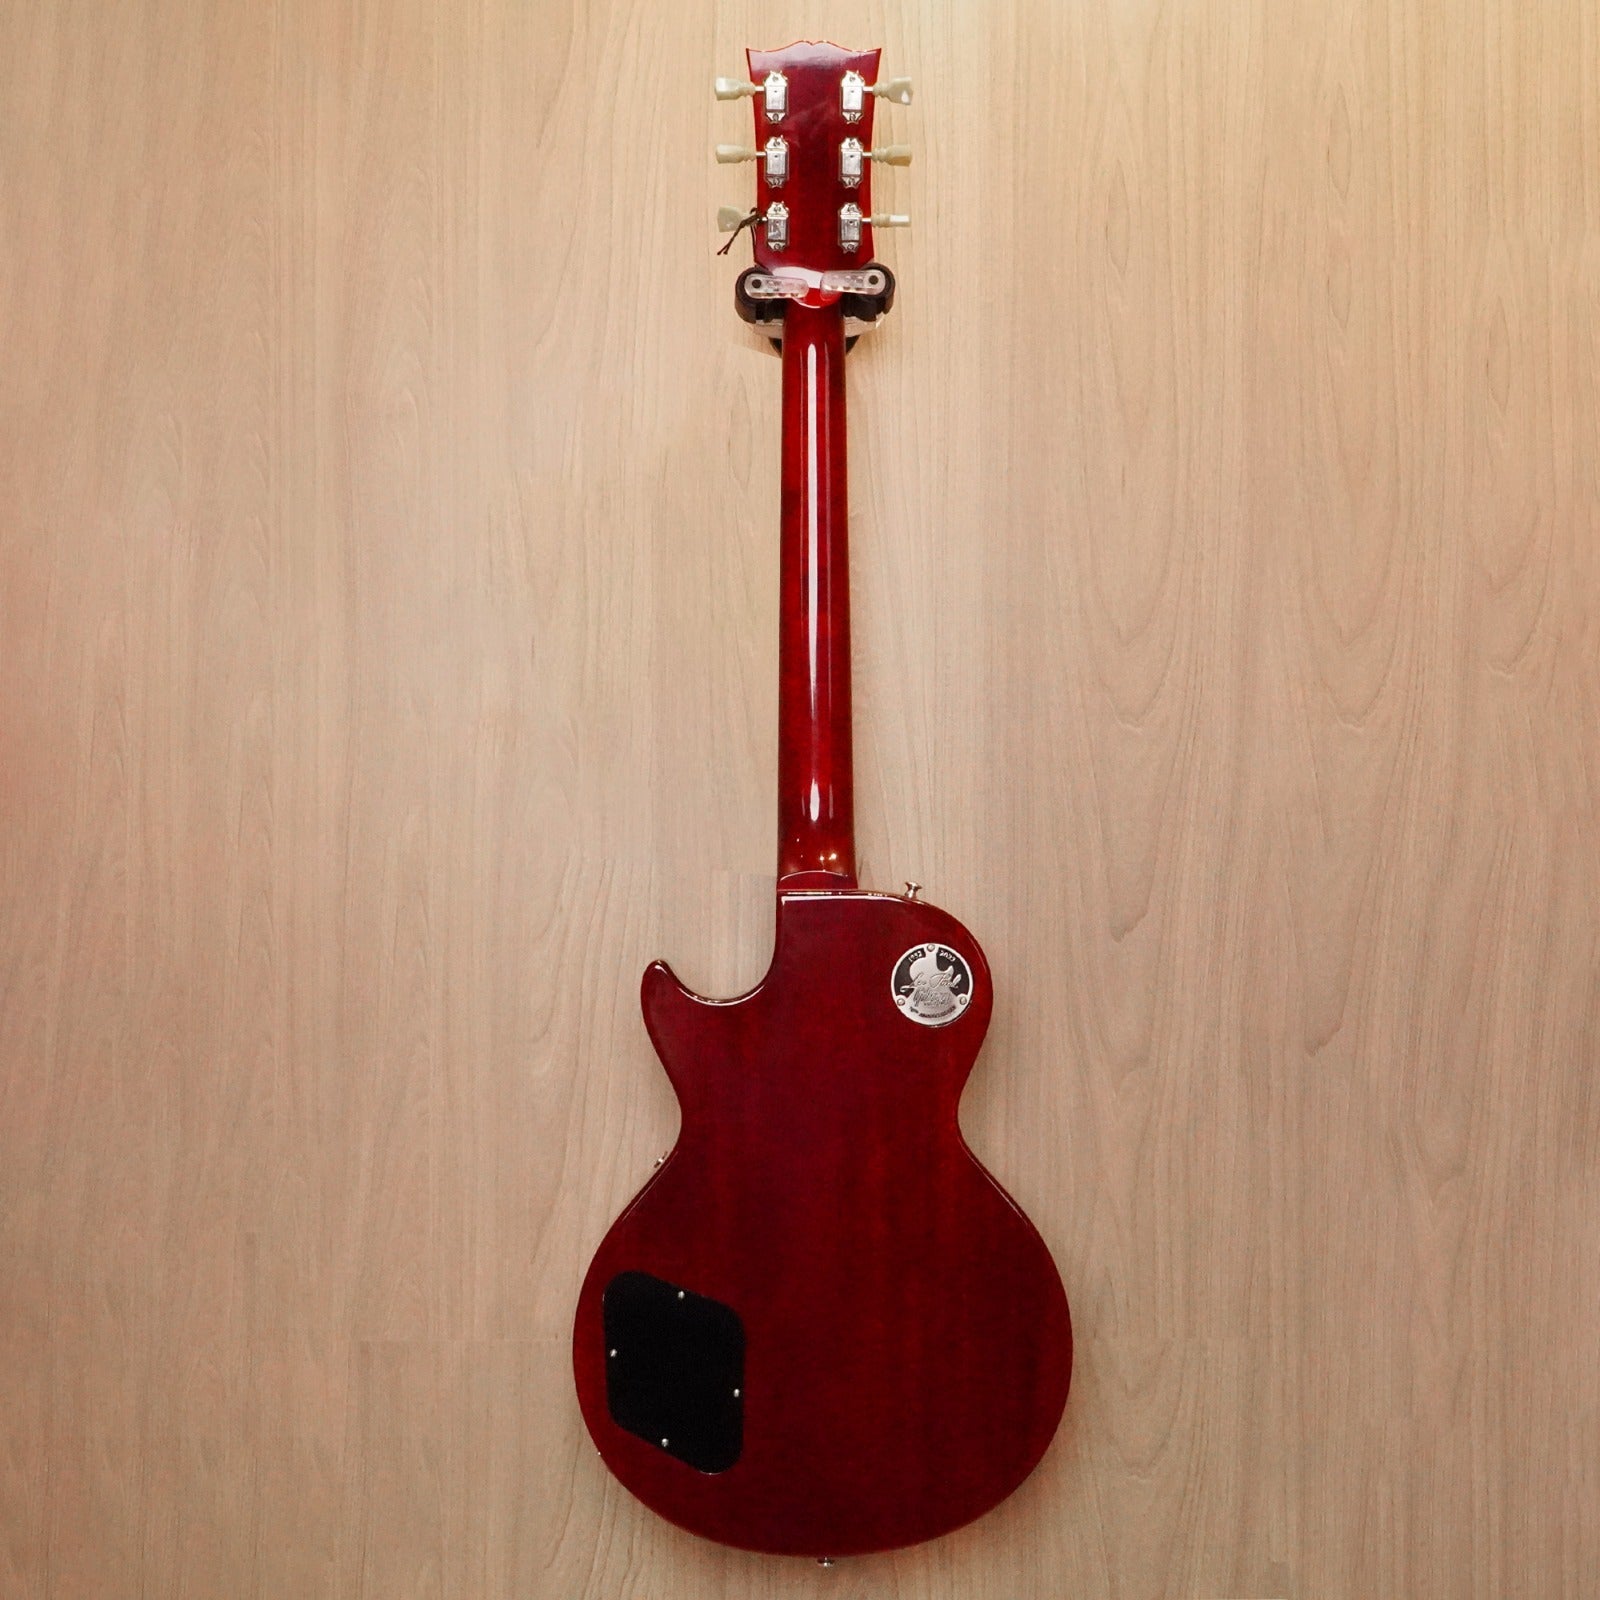 GIBSON CUSTOM SHOP 1976 LES PAUL DELUXE P90 - GLOSS WINE RED